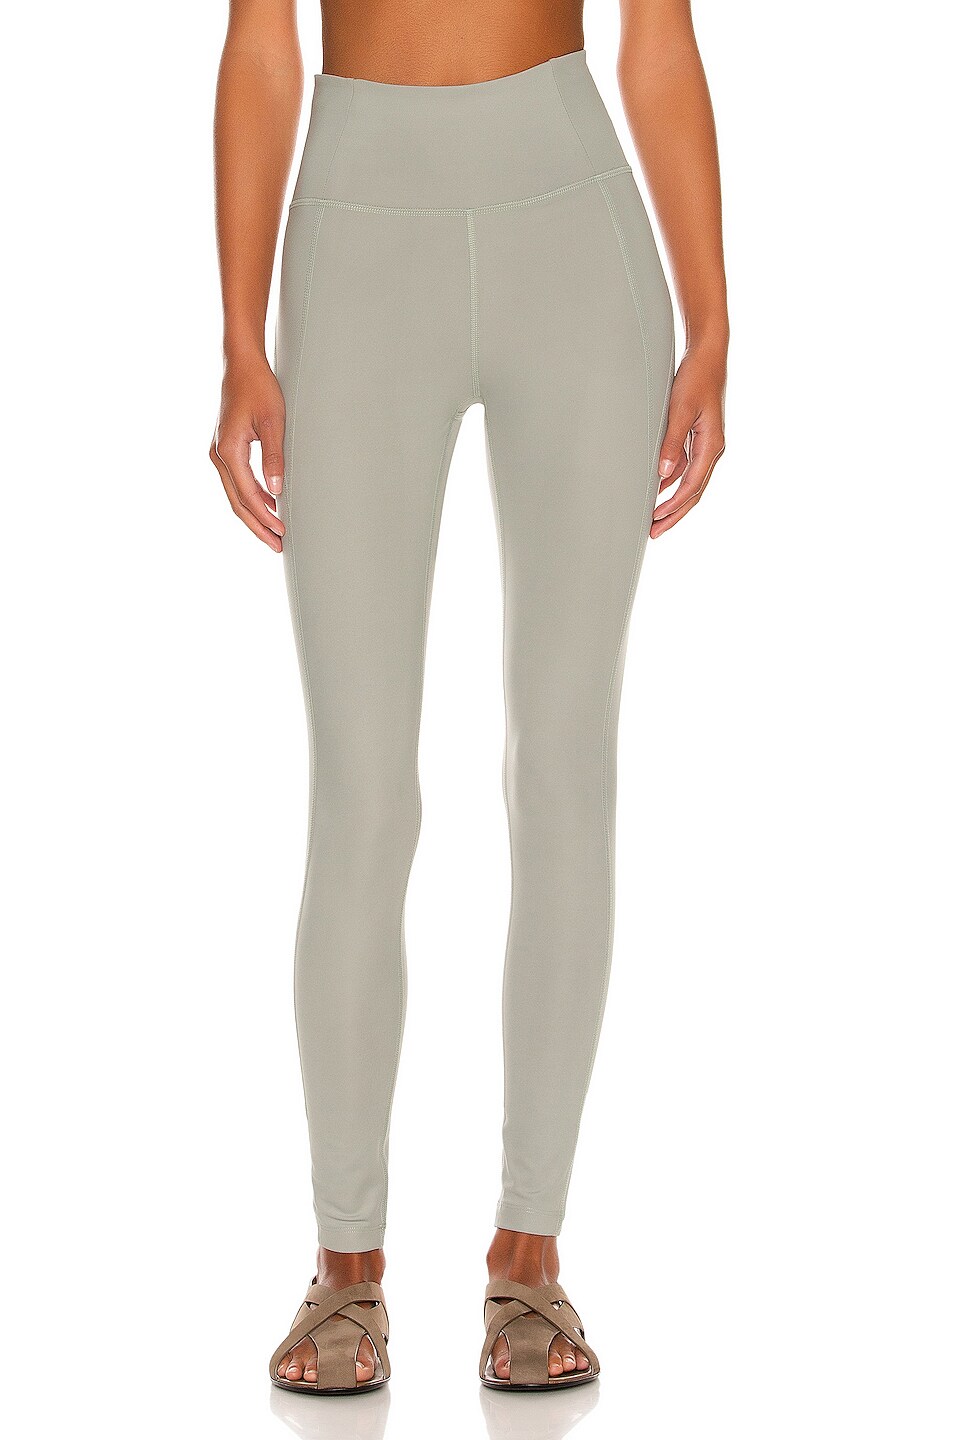 Image 1 of Girlfriend Collective High-Rise Compressive Legging in Agave